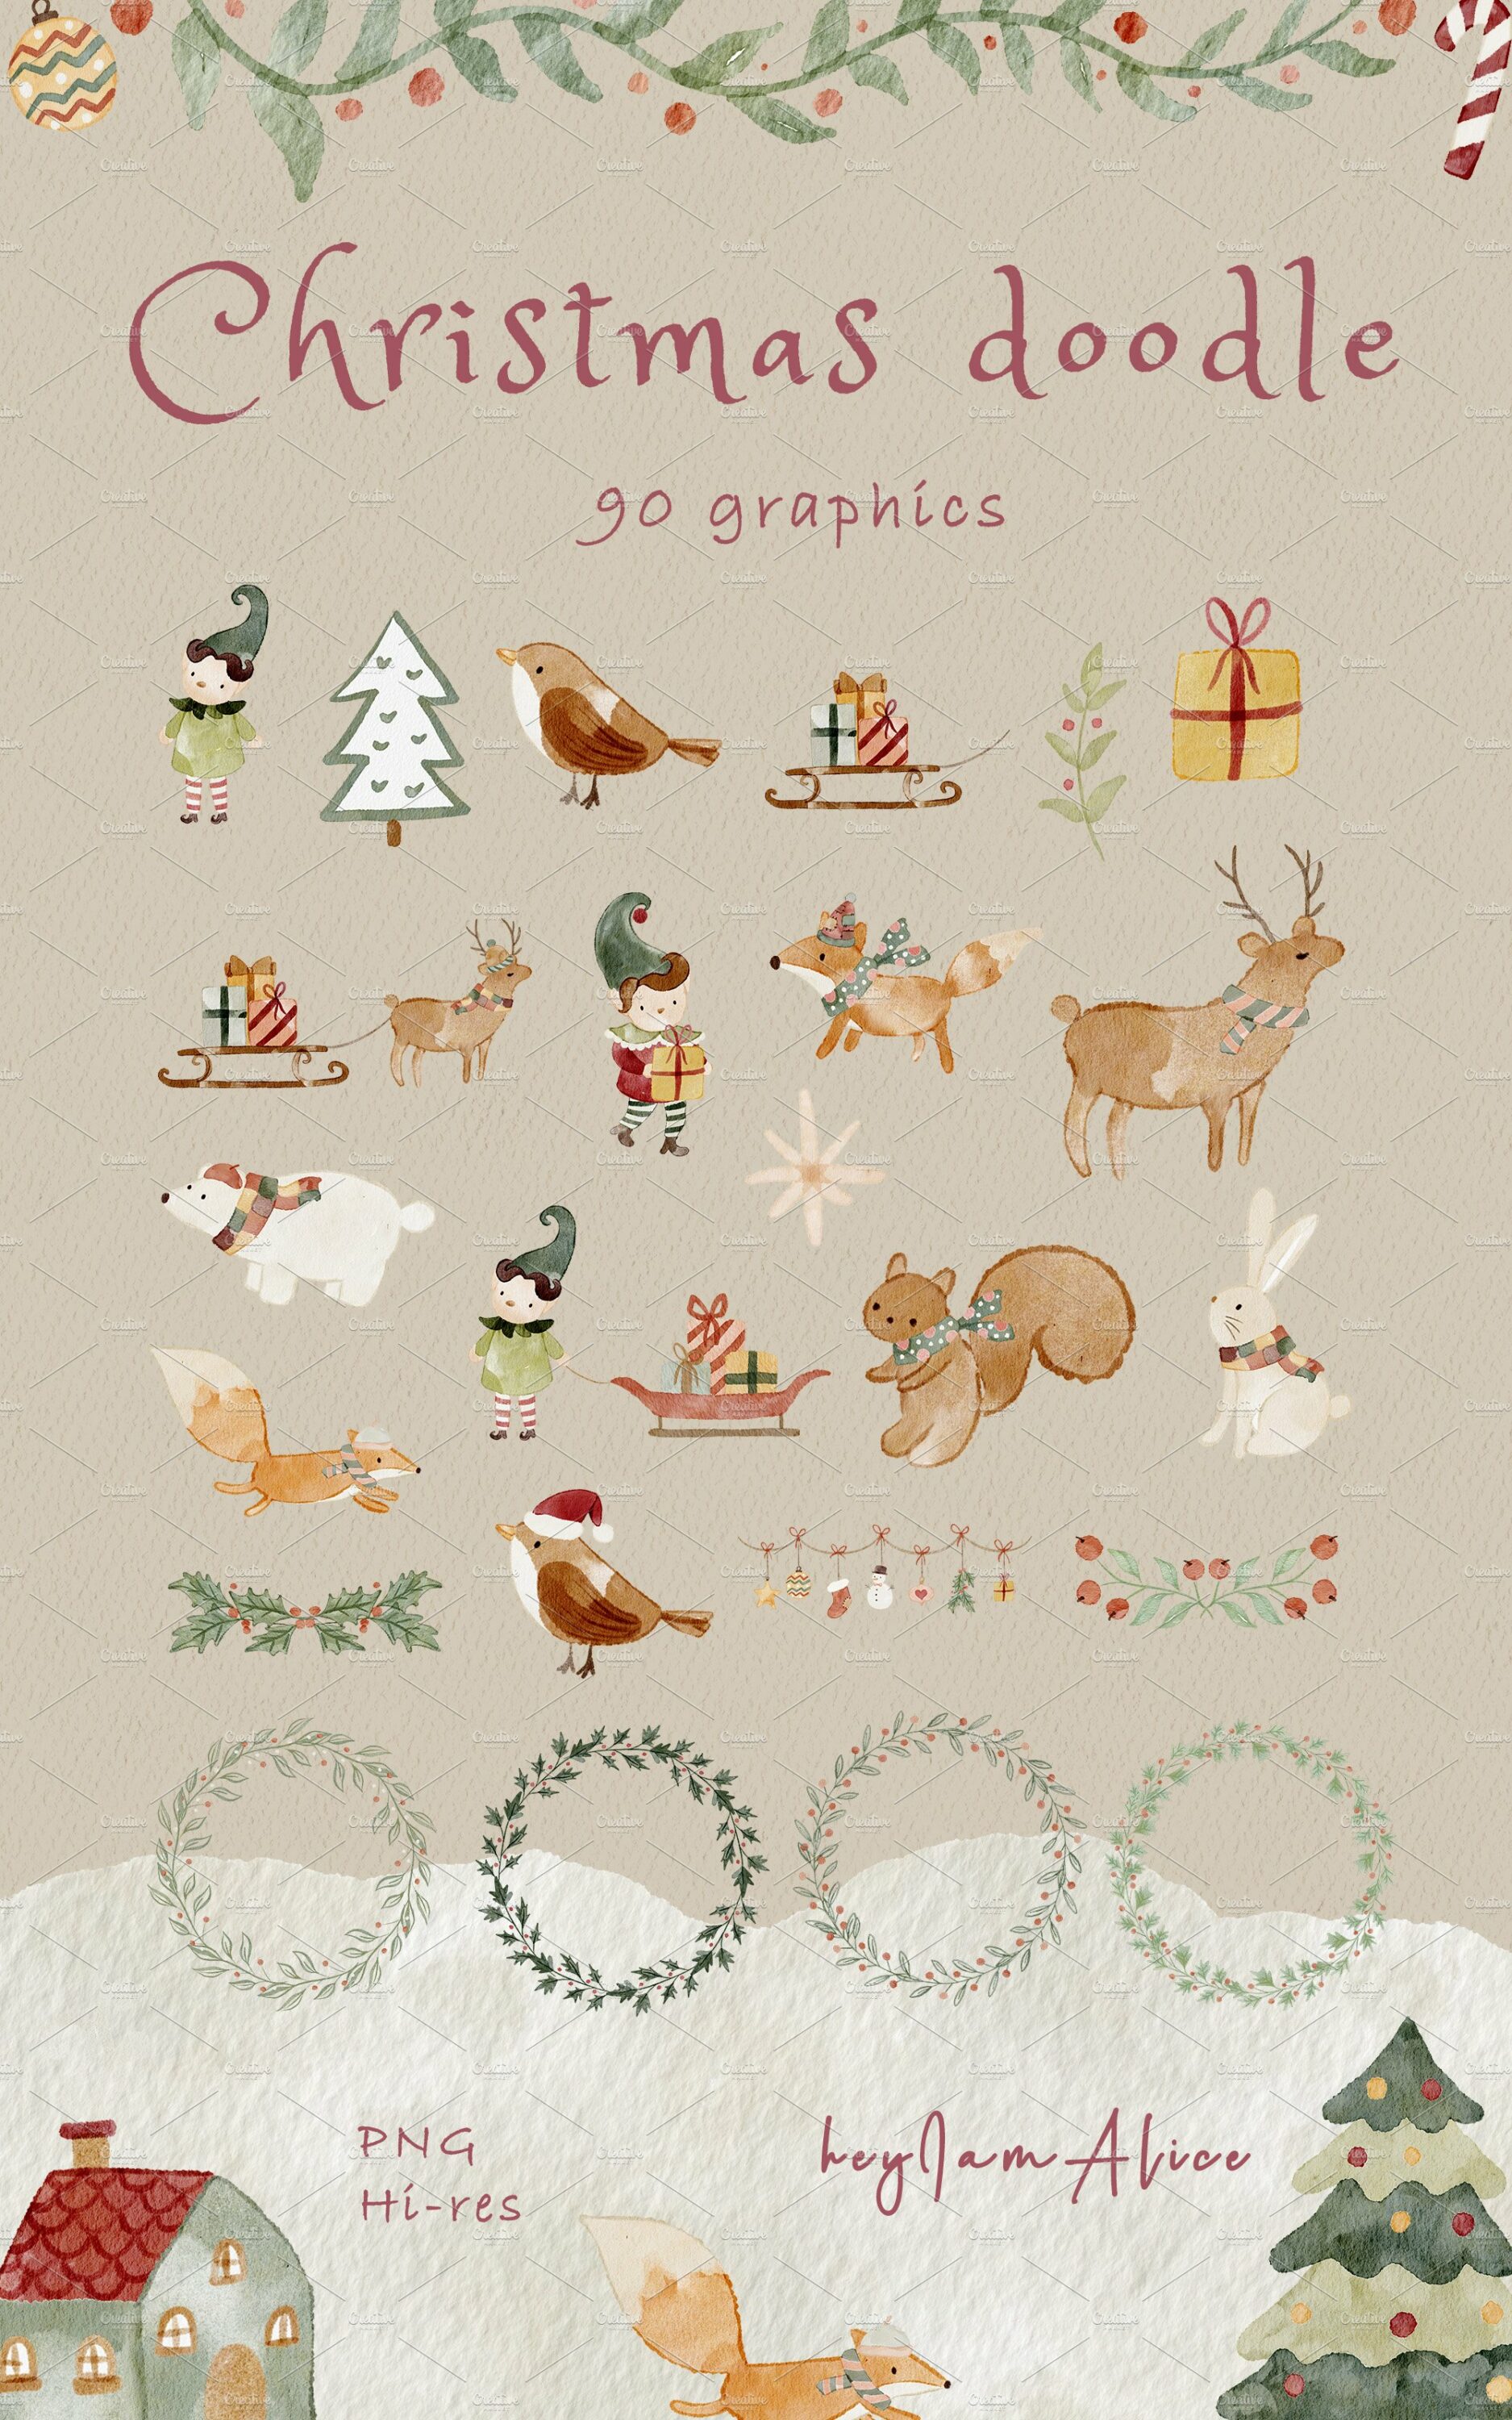 Cool simple Christmas elements for the festive mood.